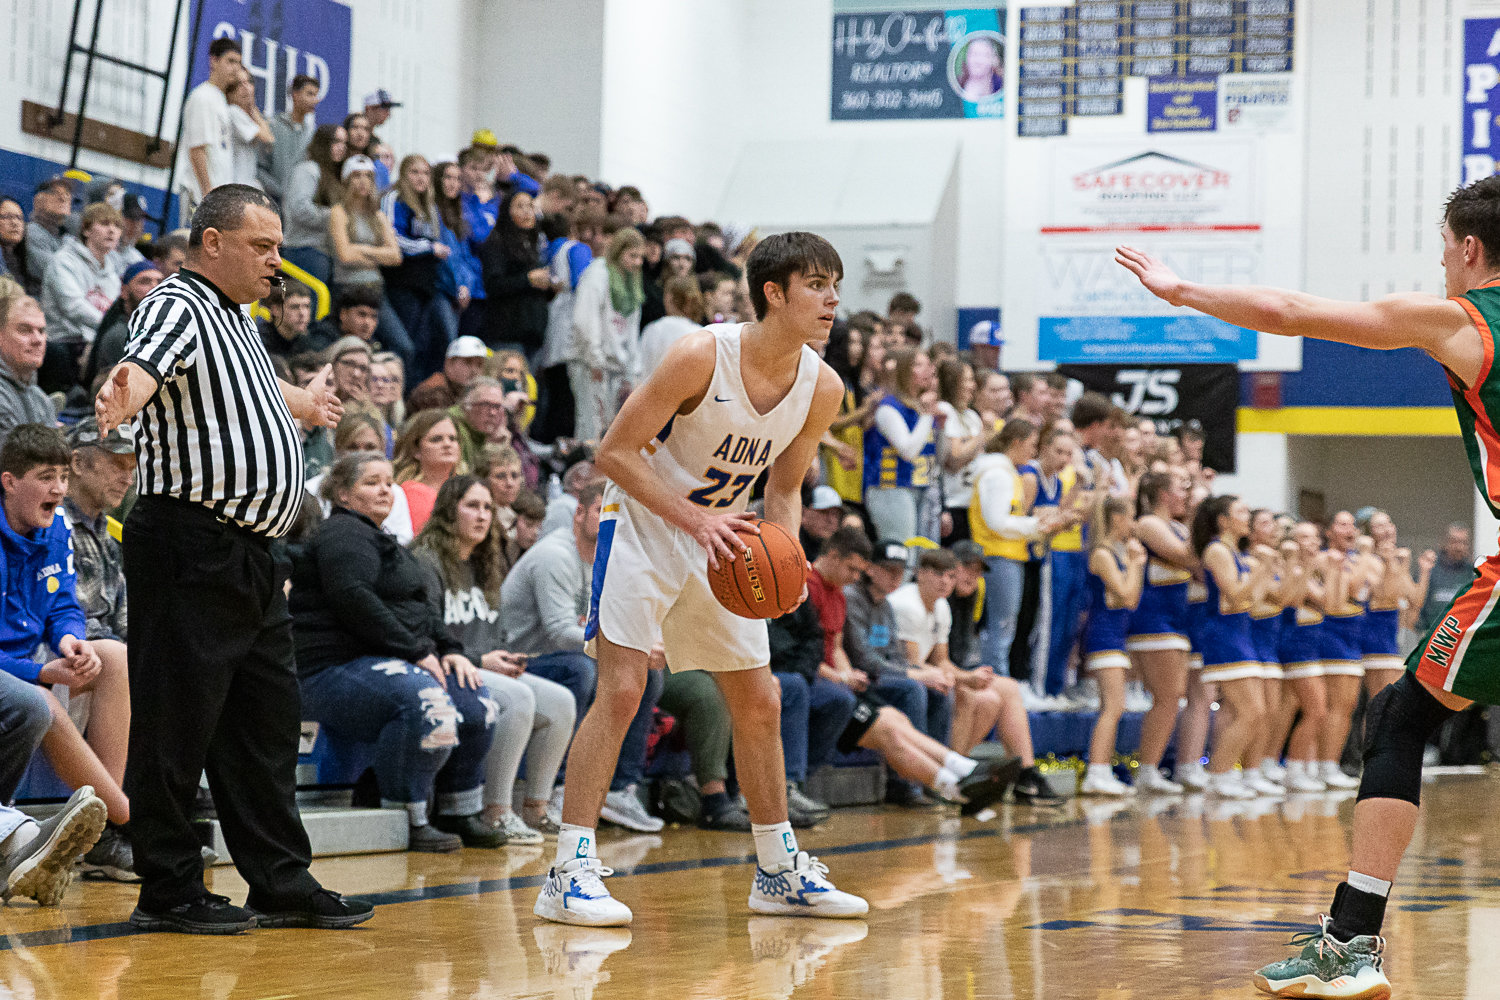 Adna guard Eli Smith looks for an opening against Morton-White Pass' defense Jan. 10.